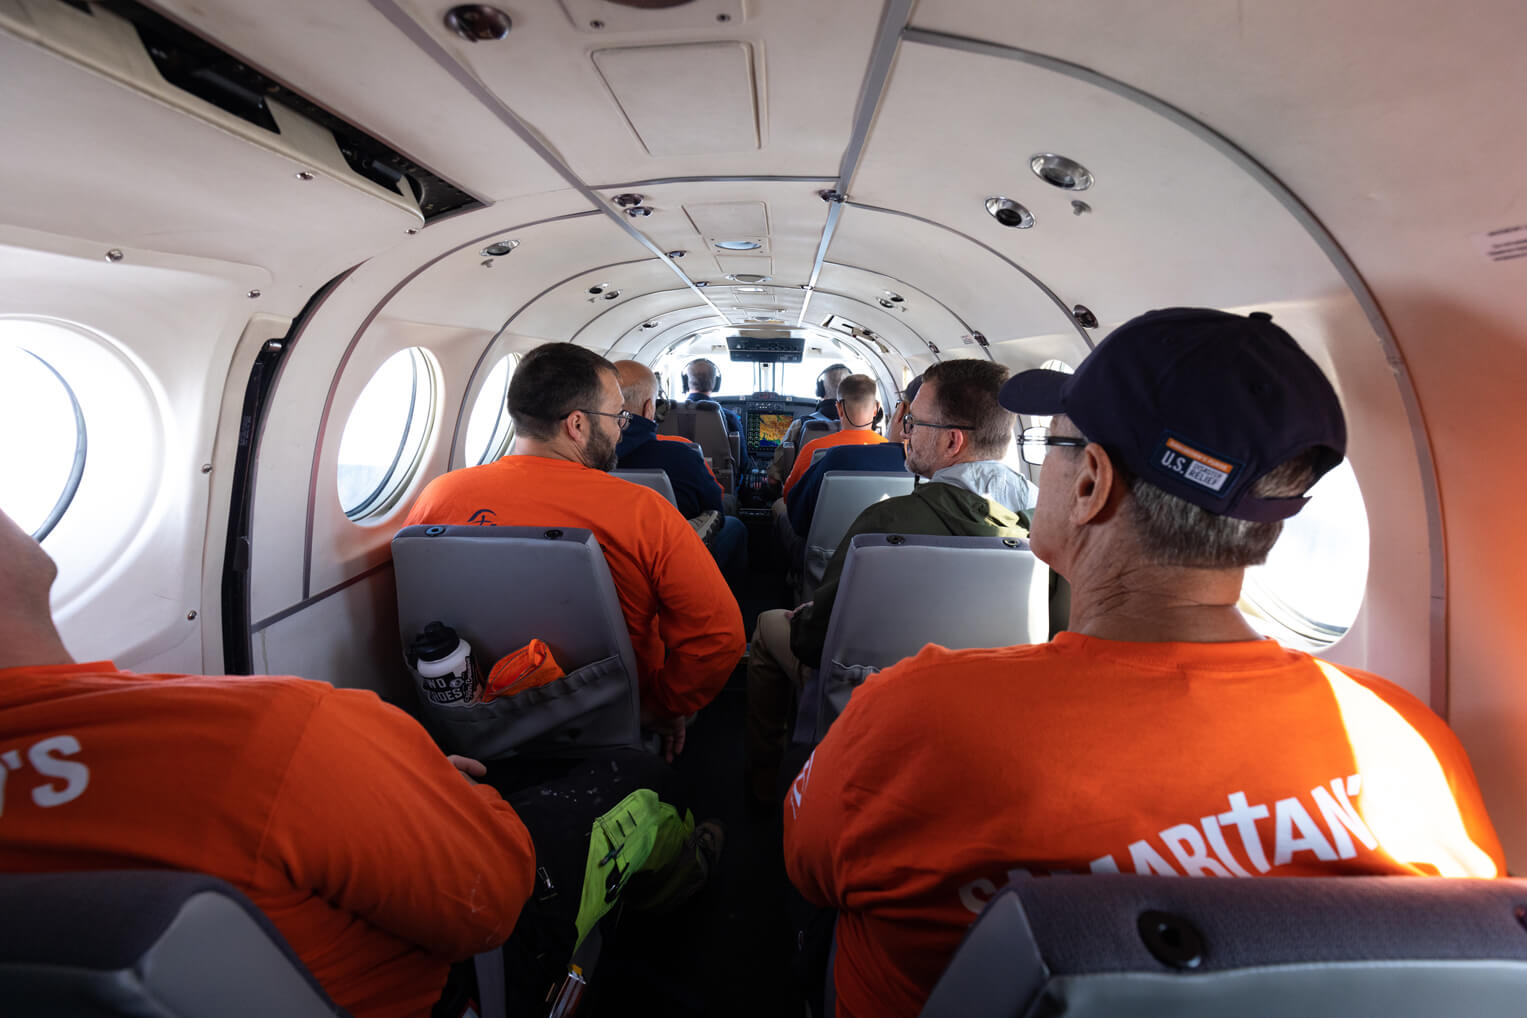 For 18 weeks, groups of volunteers flew on Samaritan's Purse aircraft from Soldotna.